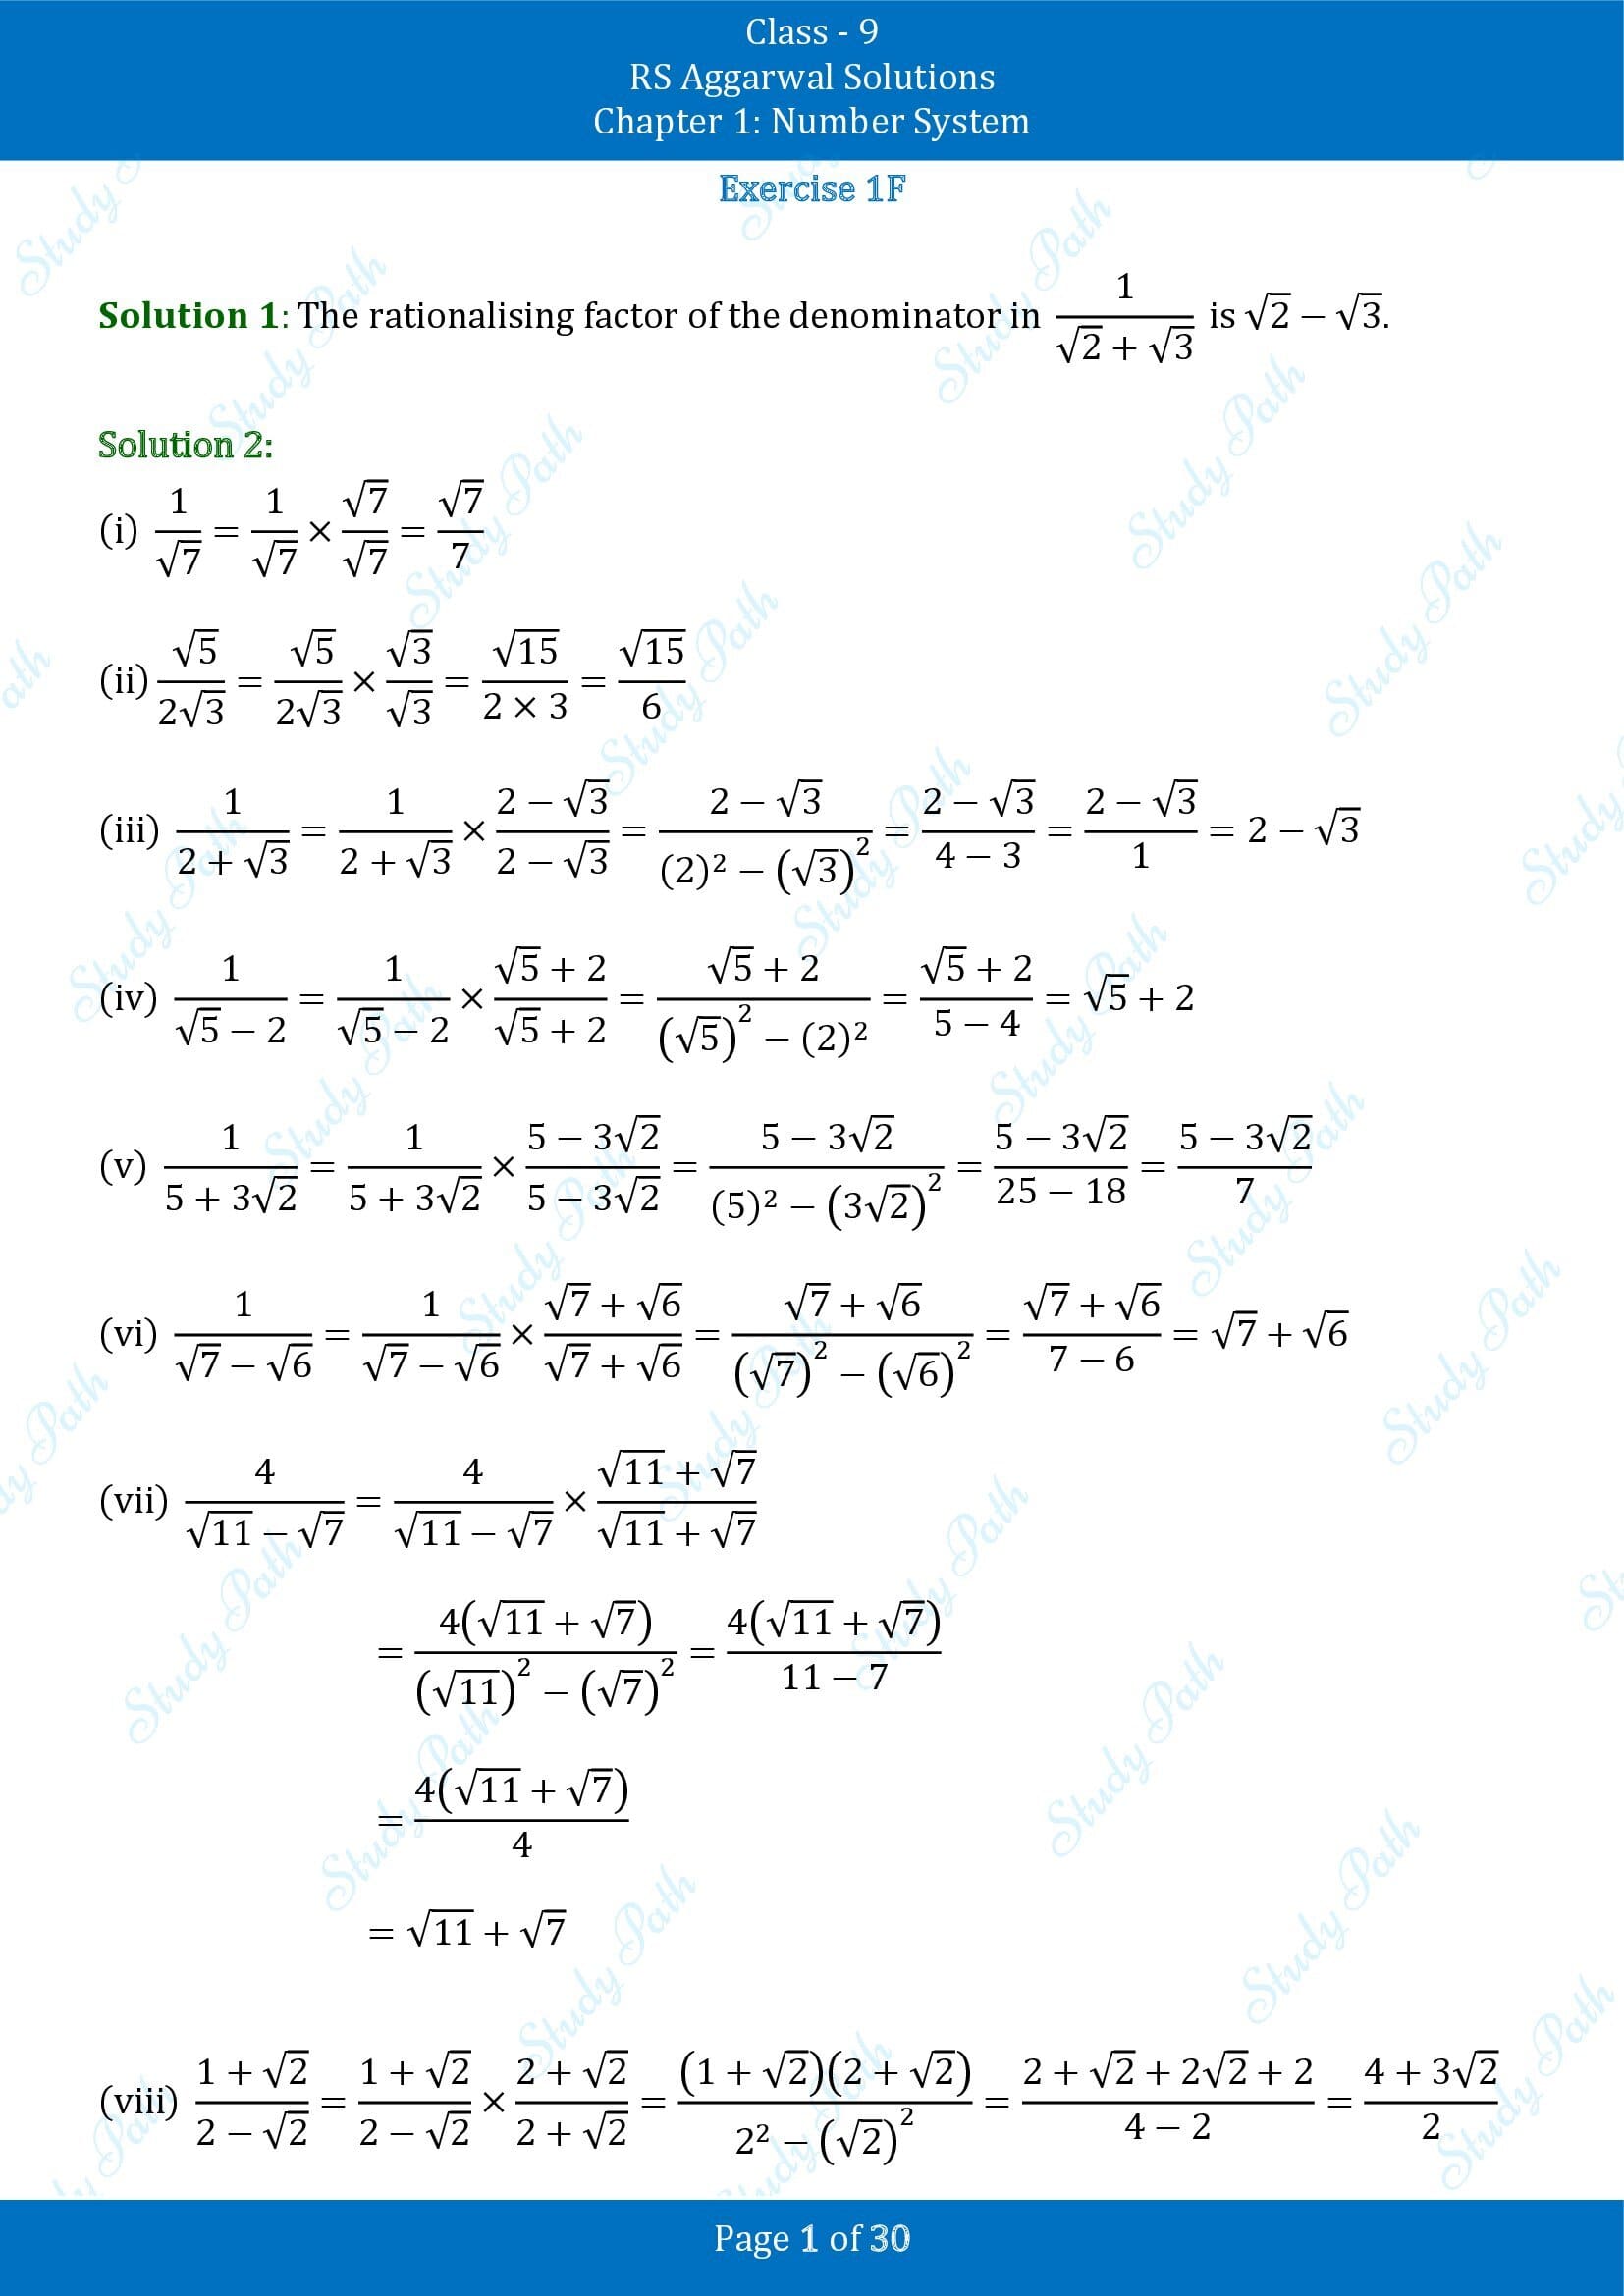 RS Aggarwal Solutions Class 9 Chapter 1 Number System Exercise 1F 00001